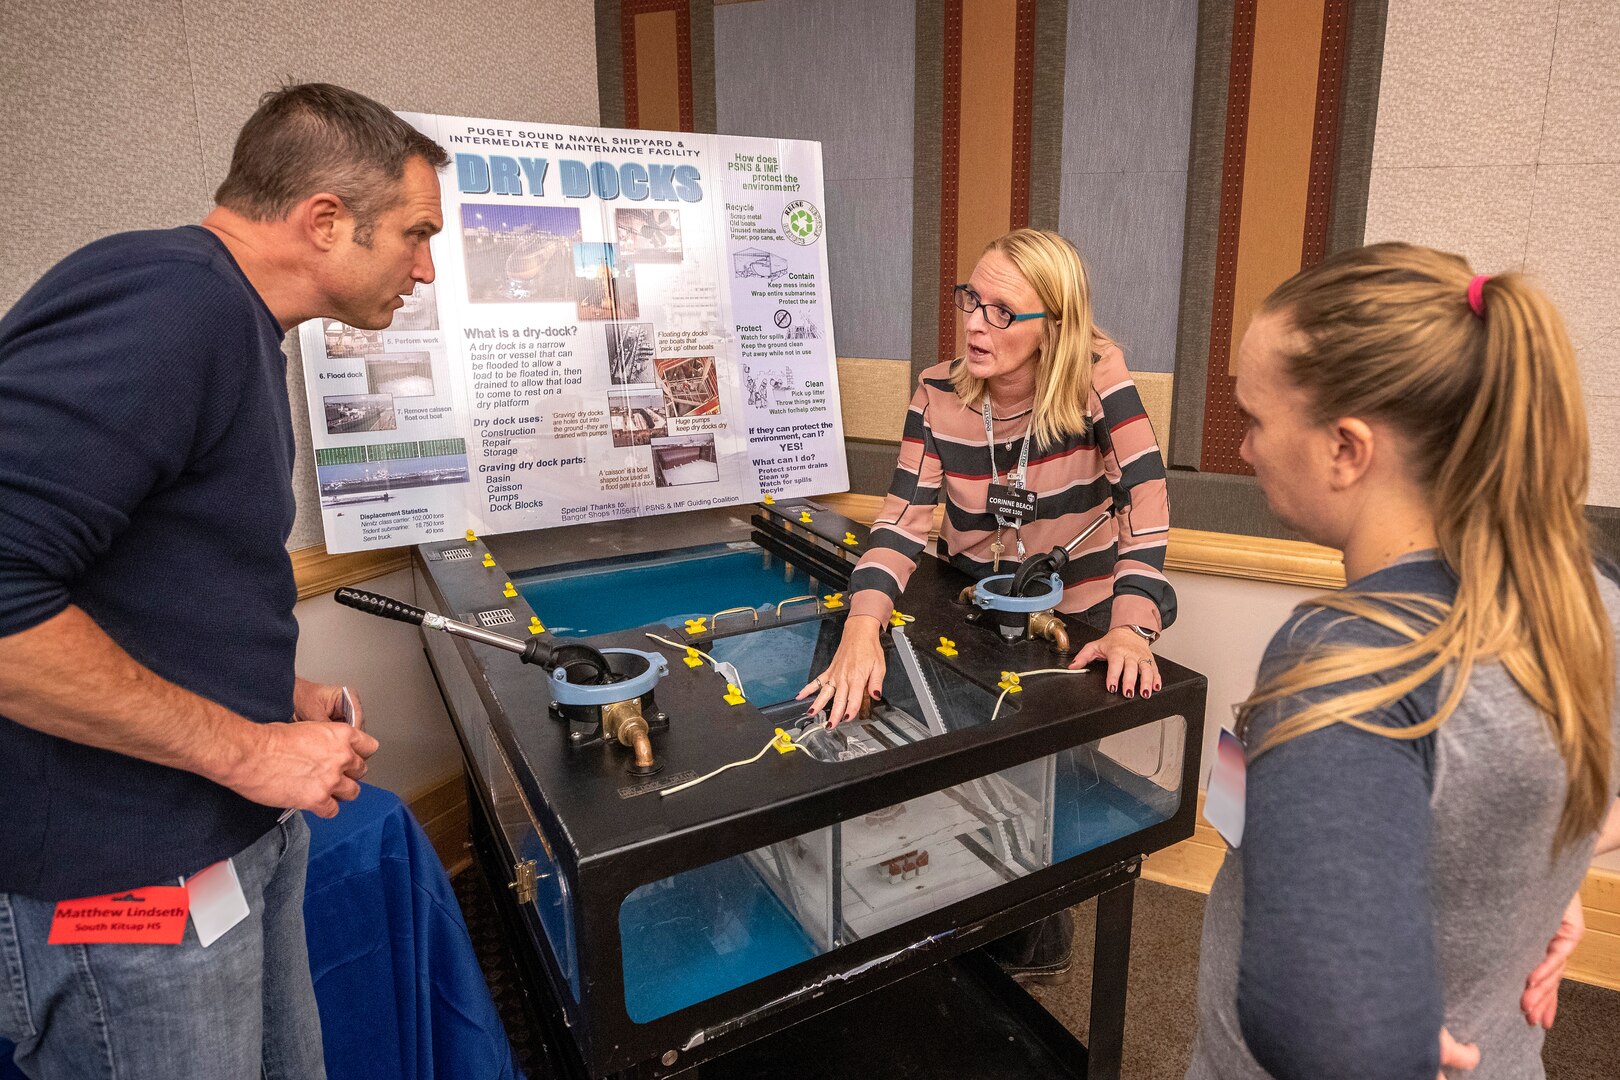 Corinne Beach, a STEM coordinator with Puget Sound Naval Shipyard & Intermediate Maintenance Facility uses a model to demonstrate a dry-dock pump for educators from South Kitsap High School in Port Orchard, Wash.